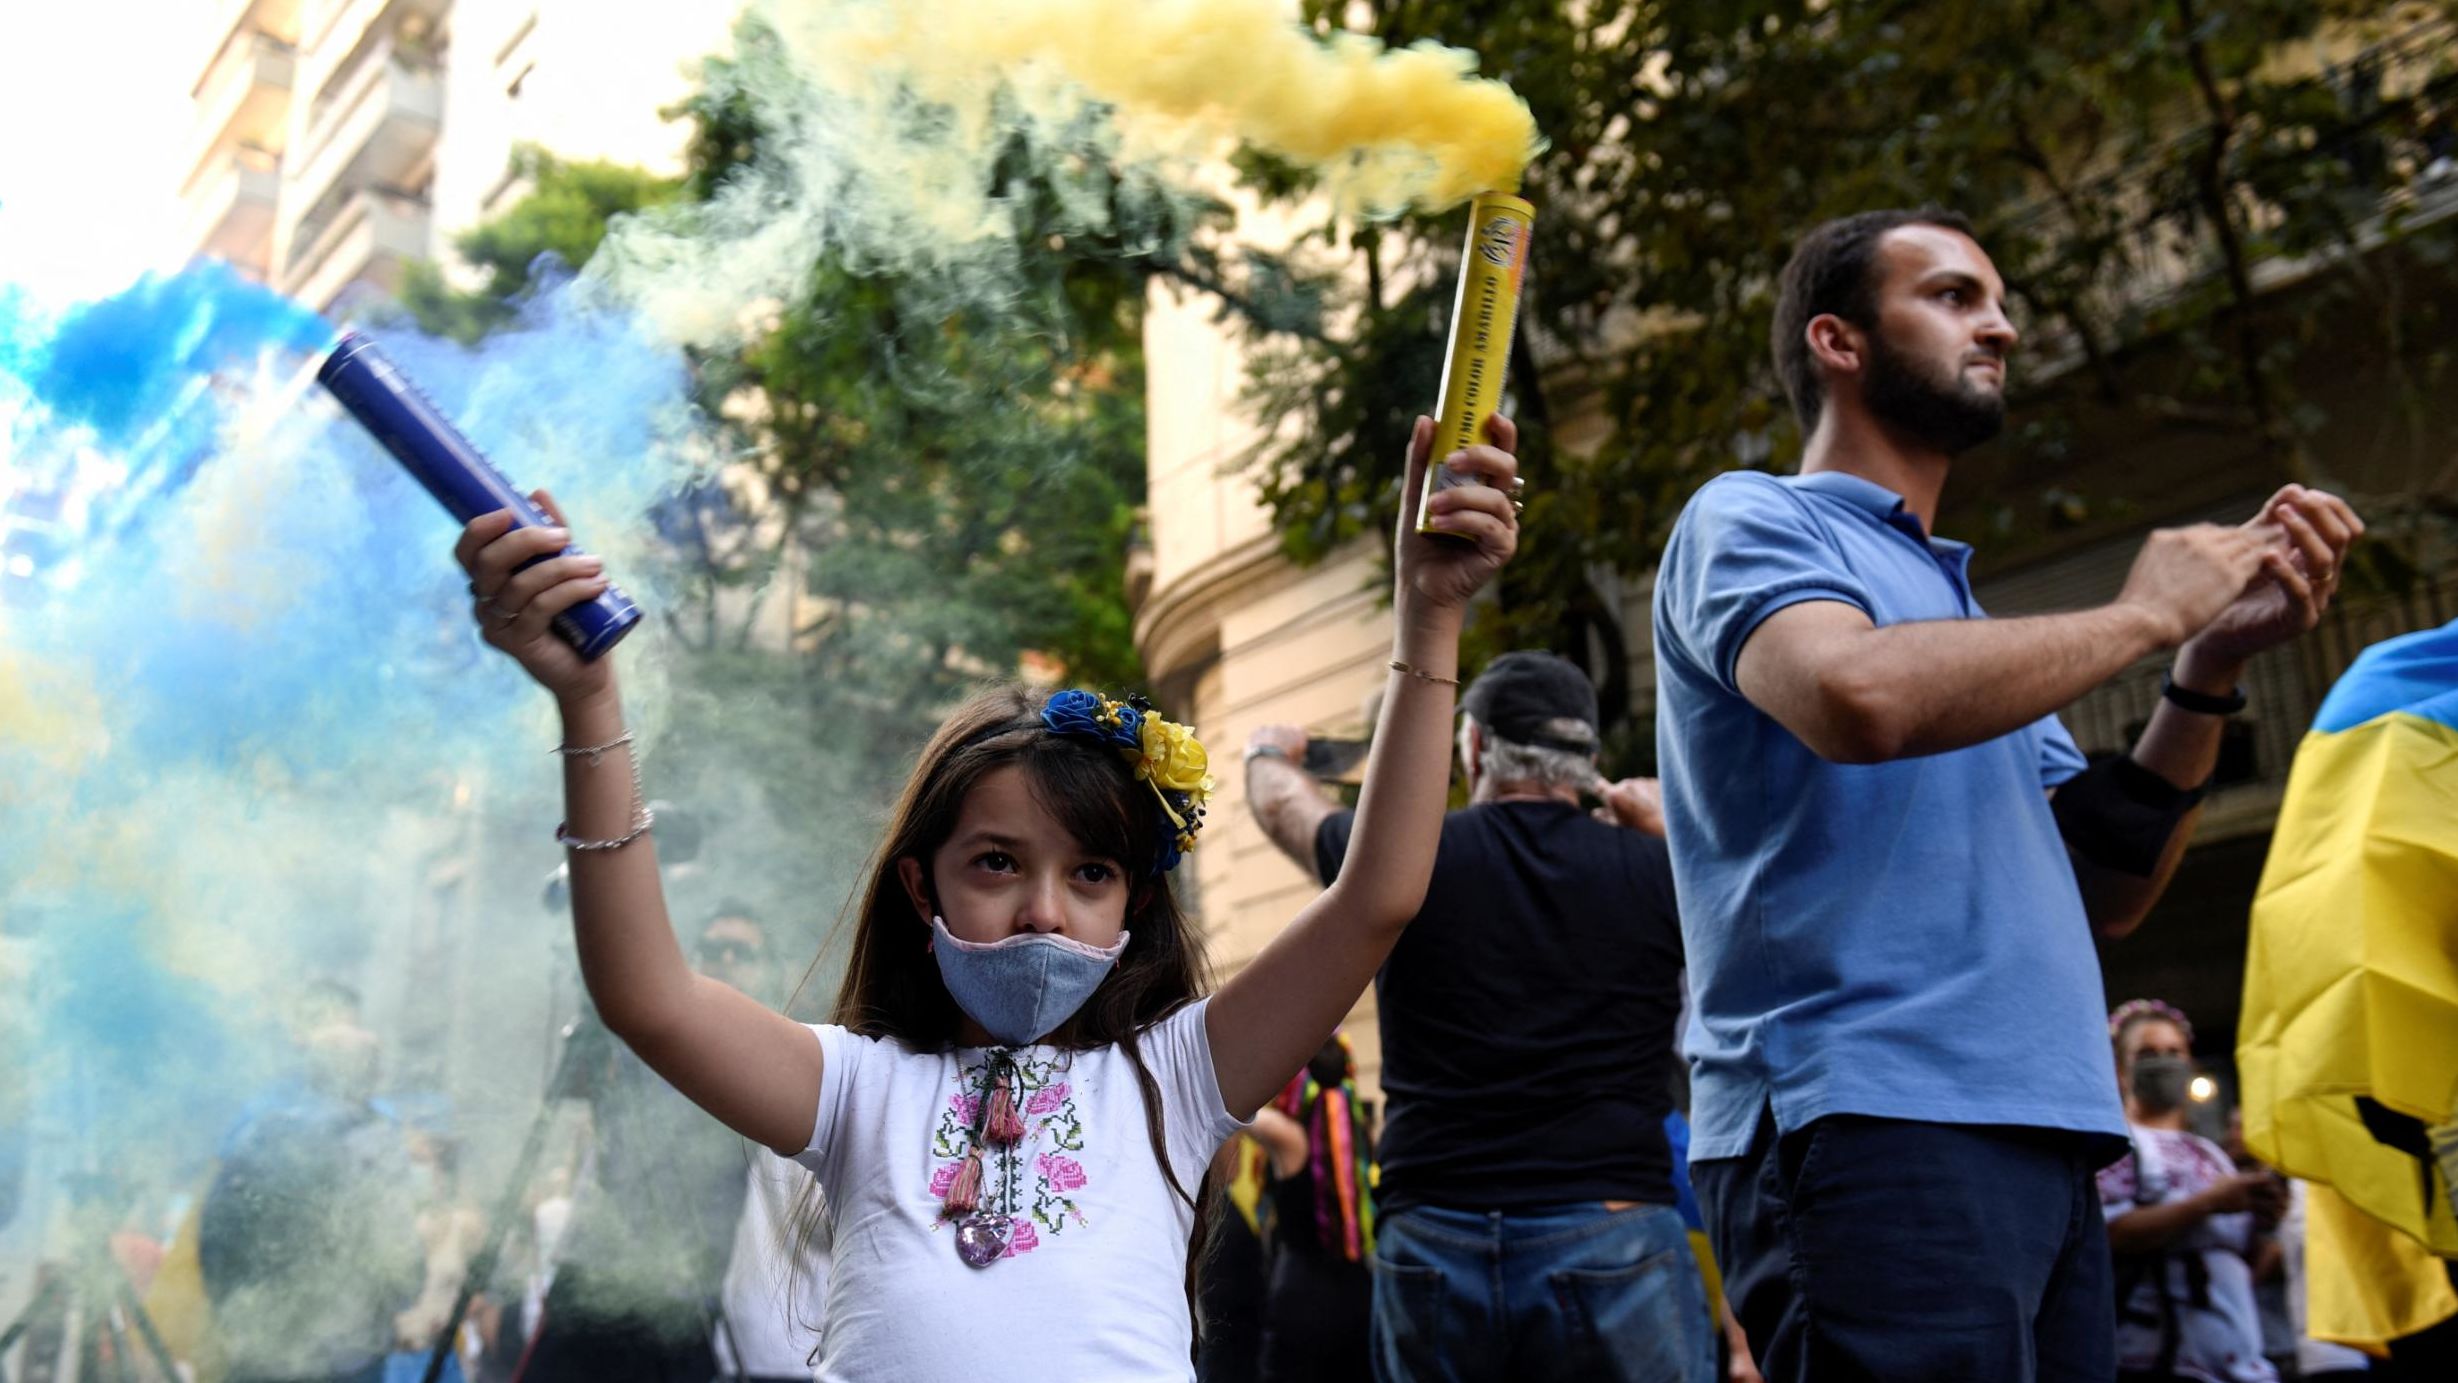 A child holds smoke bombs at a protest in Buenos Aires on February 25.